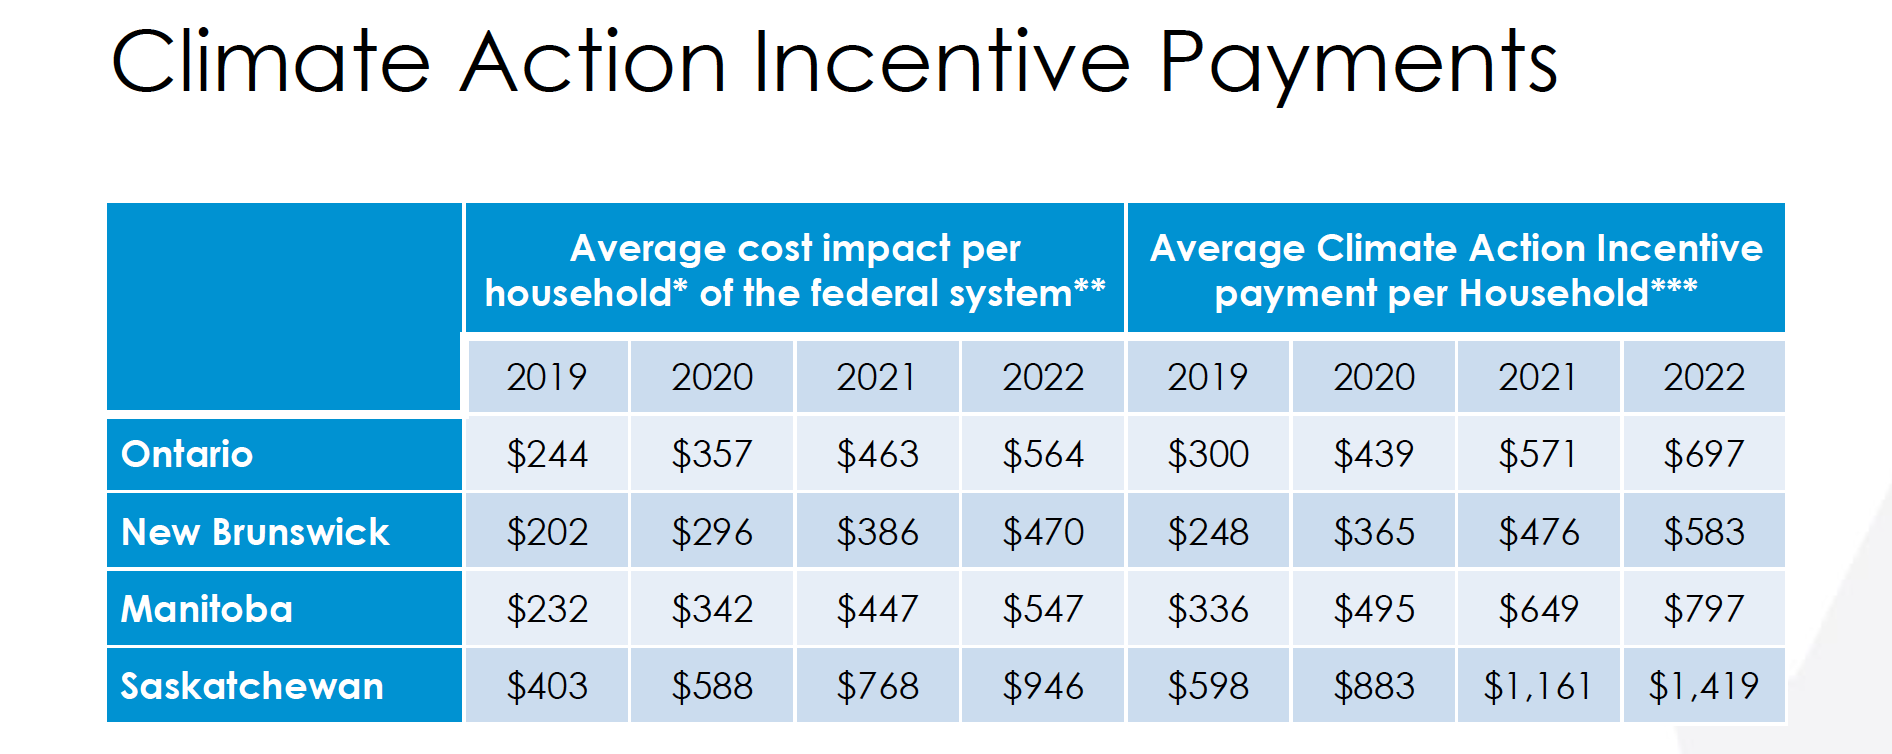 Price system. Pricing Carbon. Tax incentives графики. Carbon Tax Canada Chart. Climate Action.